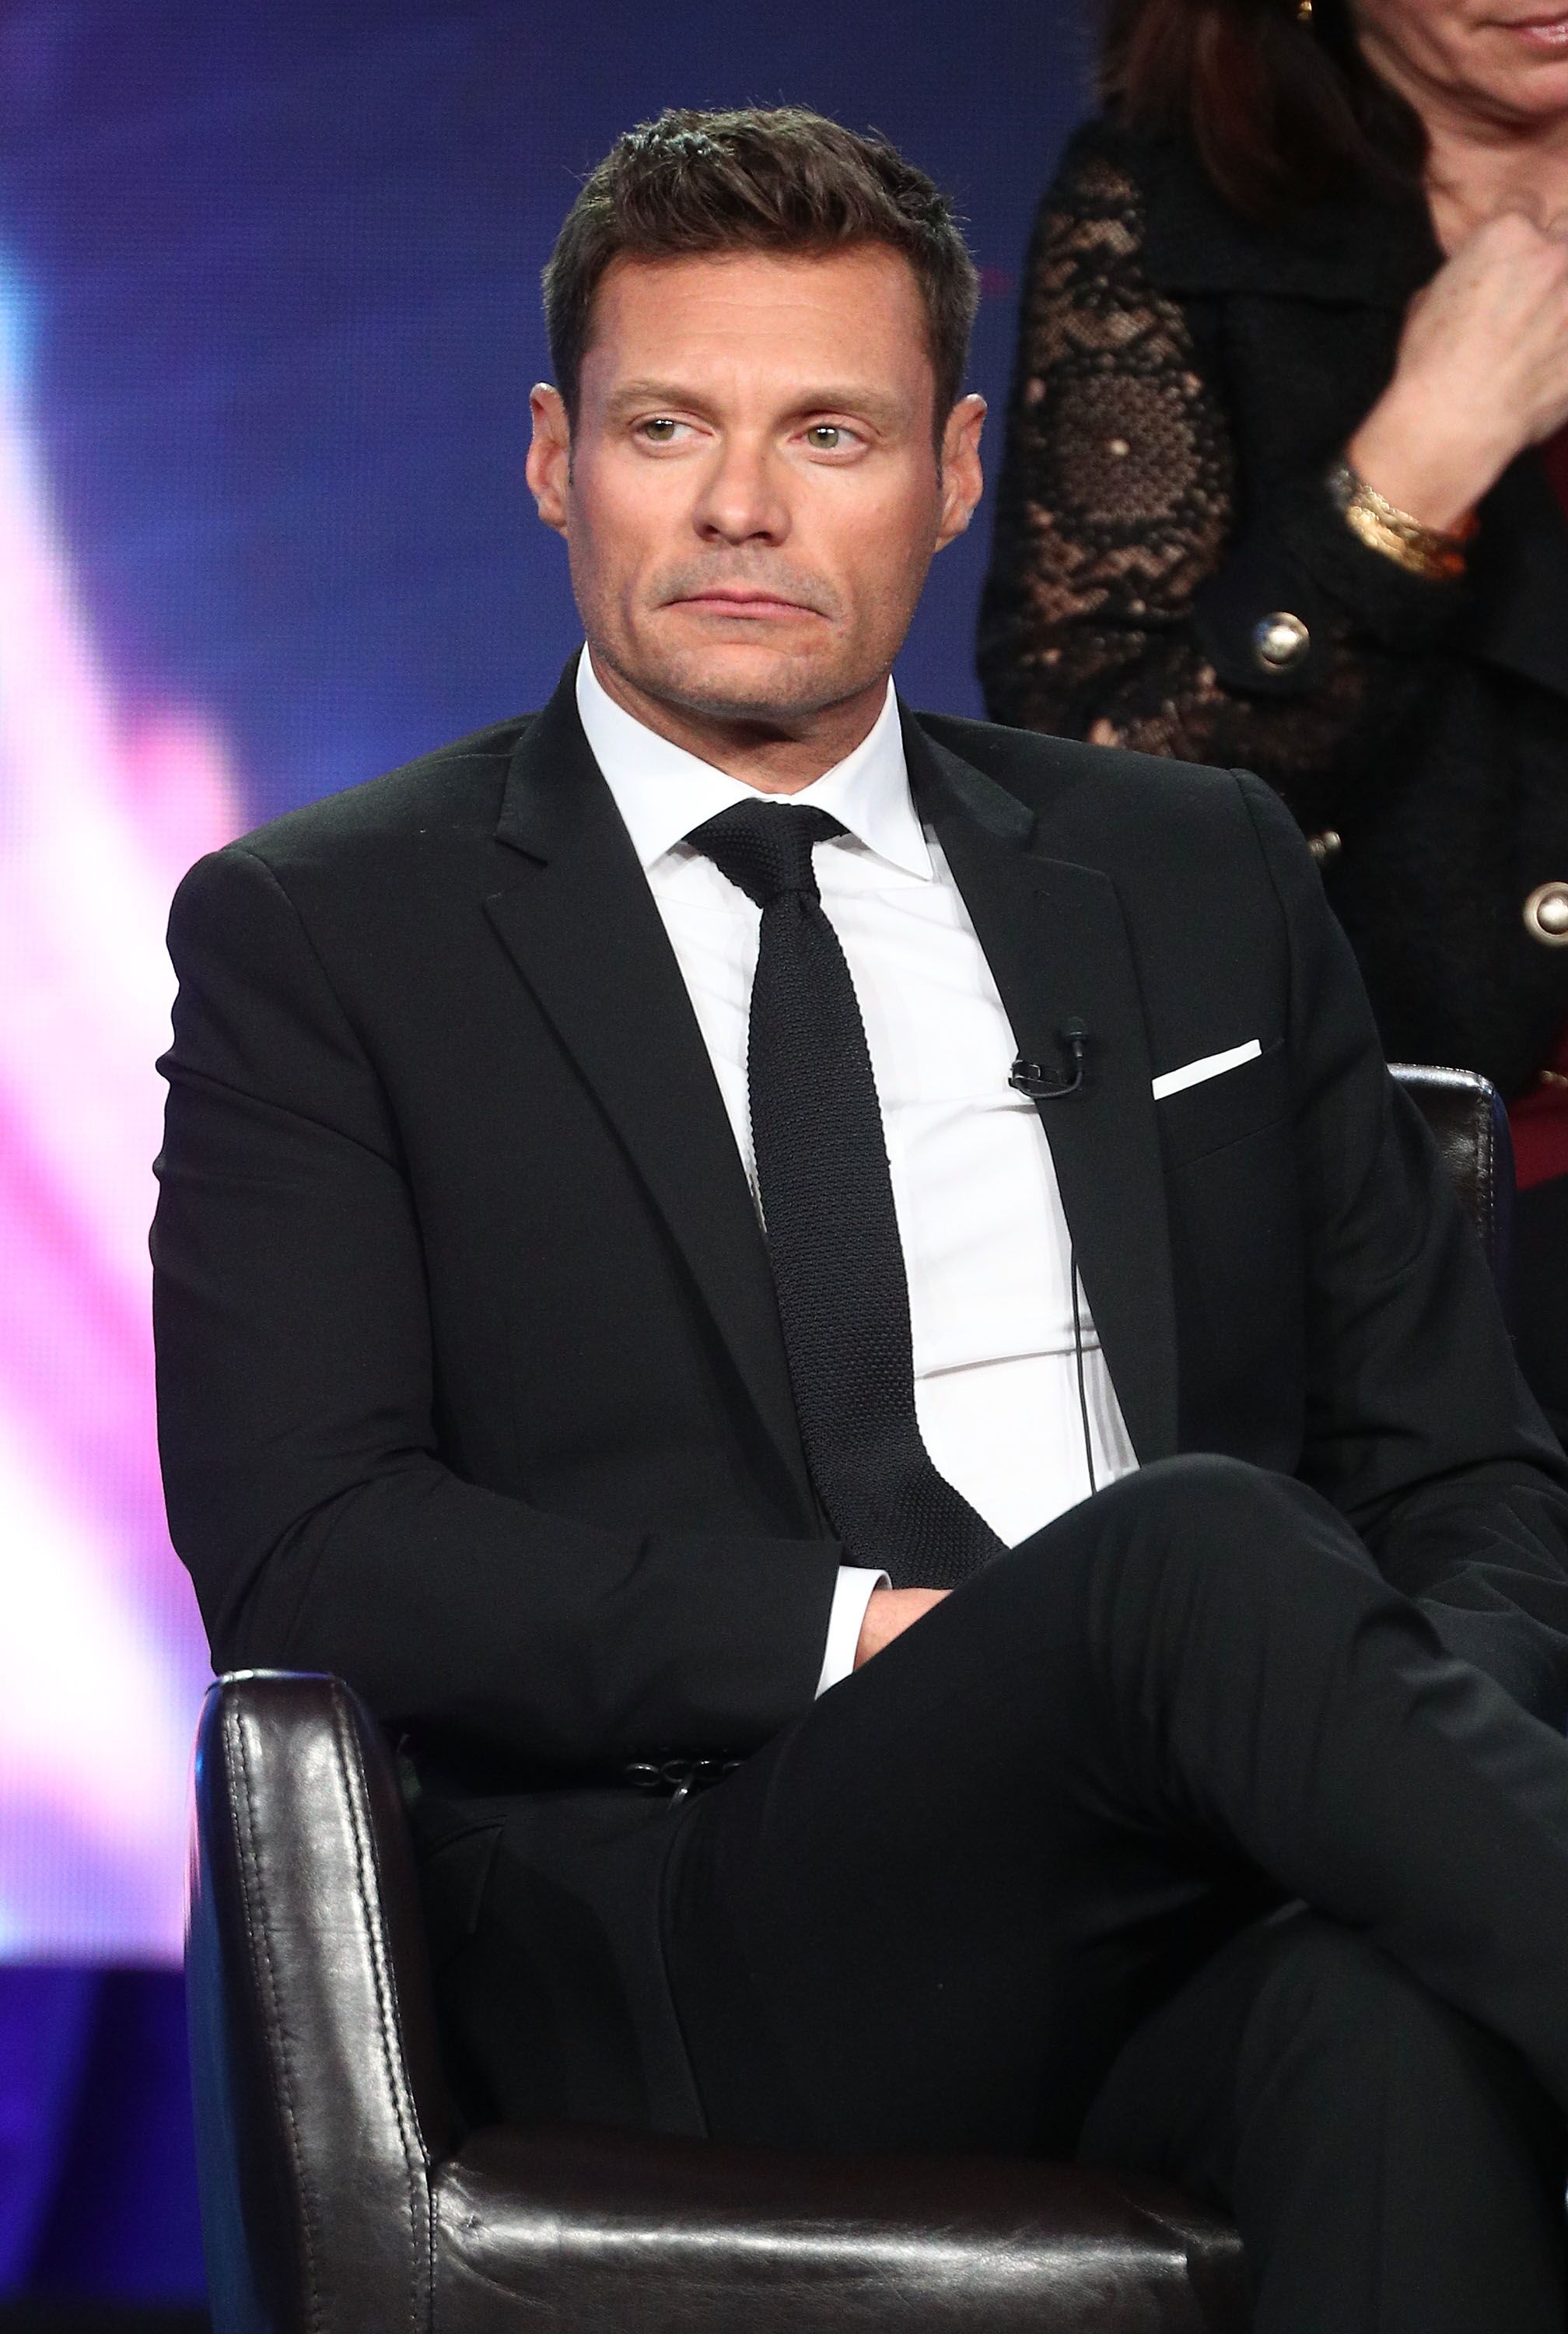 Ryan Seacrest during the ABC Television/Disney portion of the 2018 Winter Television Critics Association Press Tour | Getty Images